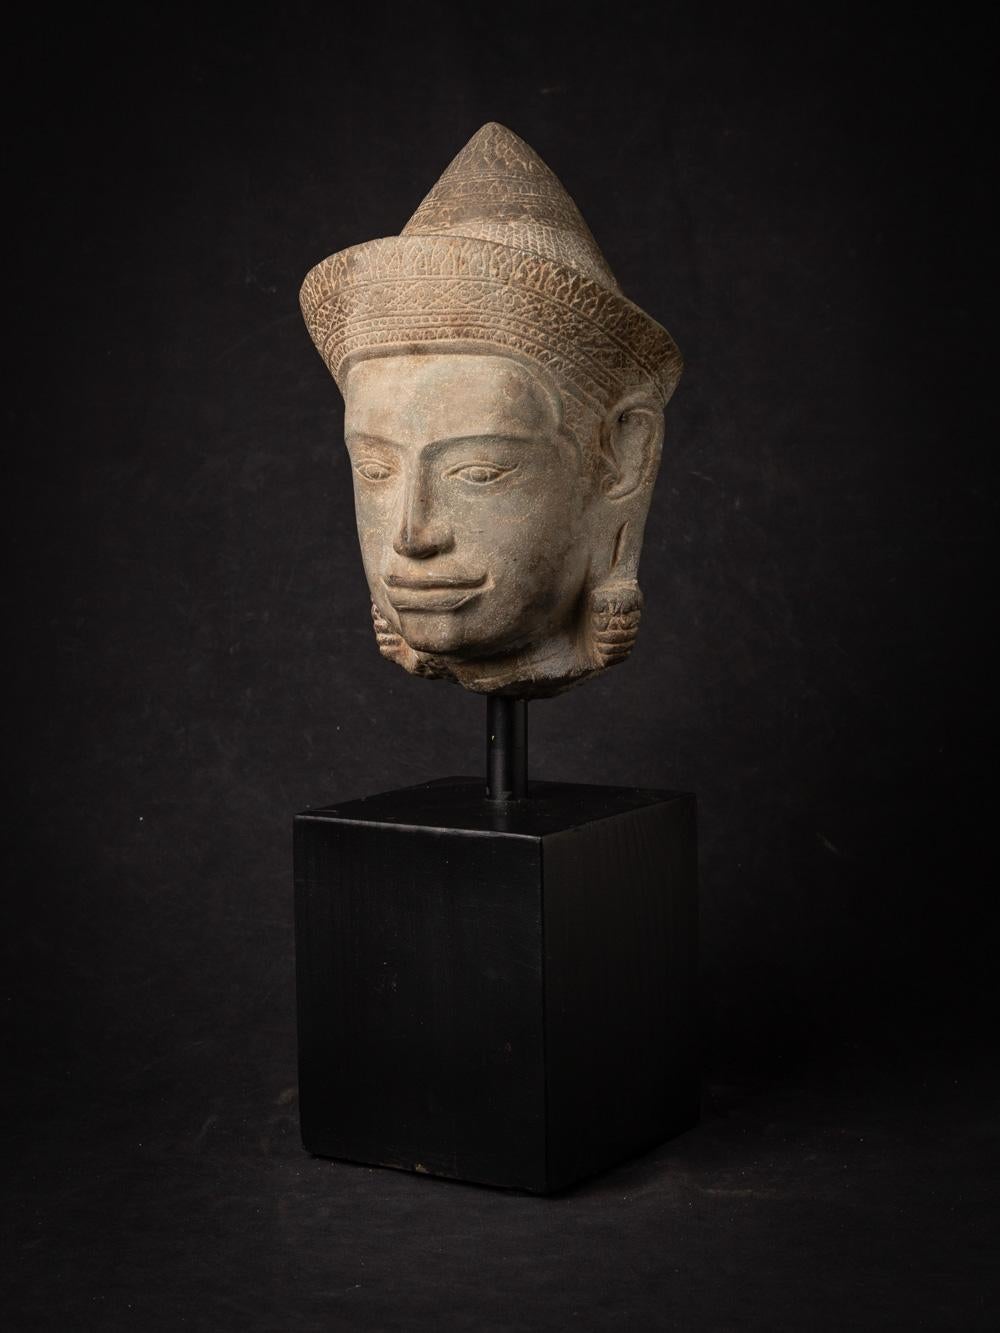 The 13th-century sandstone Vishnu head from the Bayon period is a remarkable and historically significant artifact originating from Cambodia. Crafted from sandstone, this Vishnu head stands at 47.5 cm in height, with the head alone measuring 27 cm